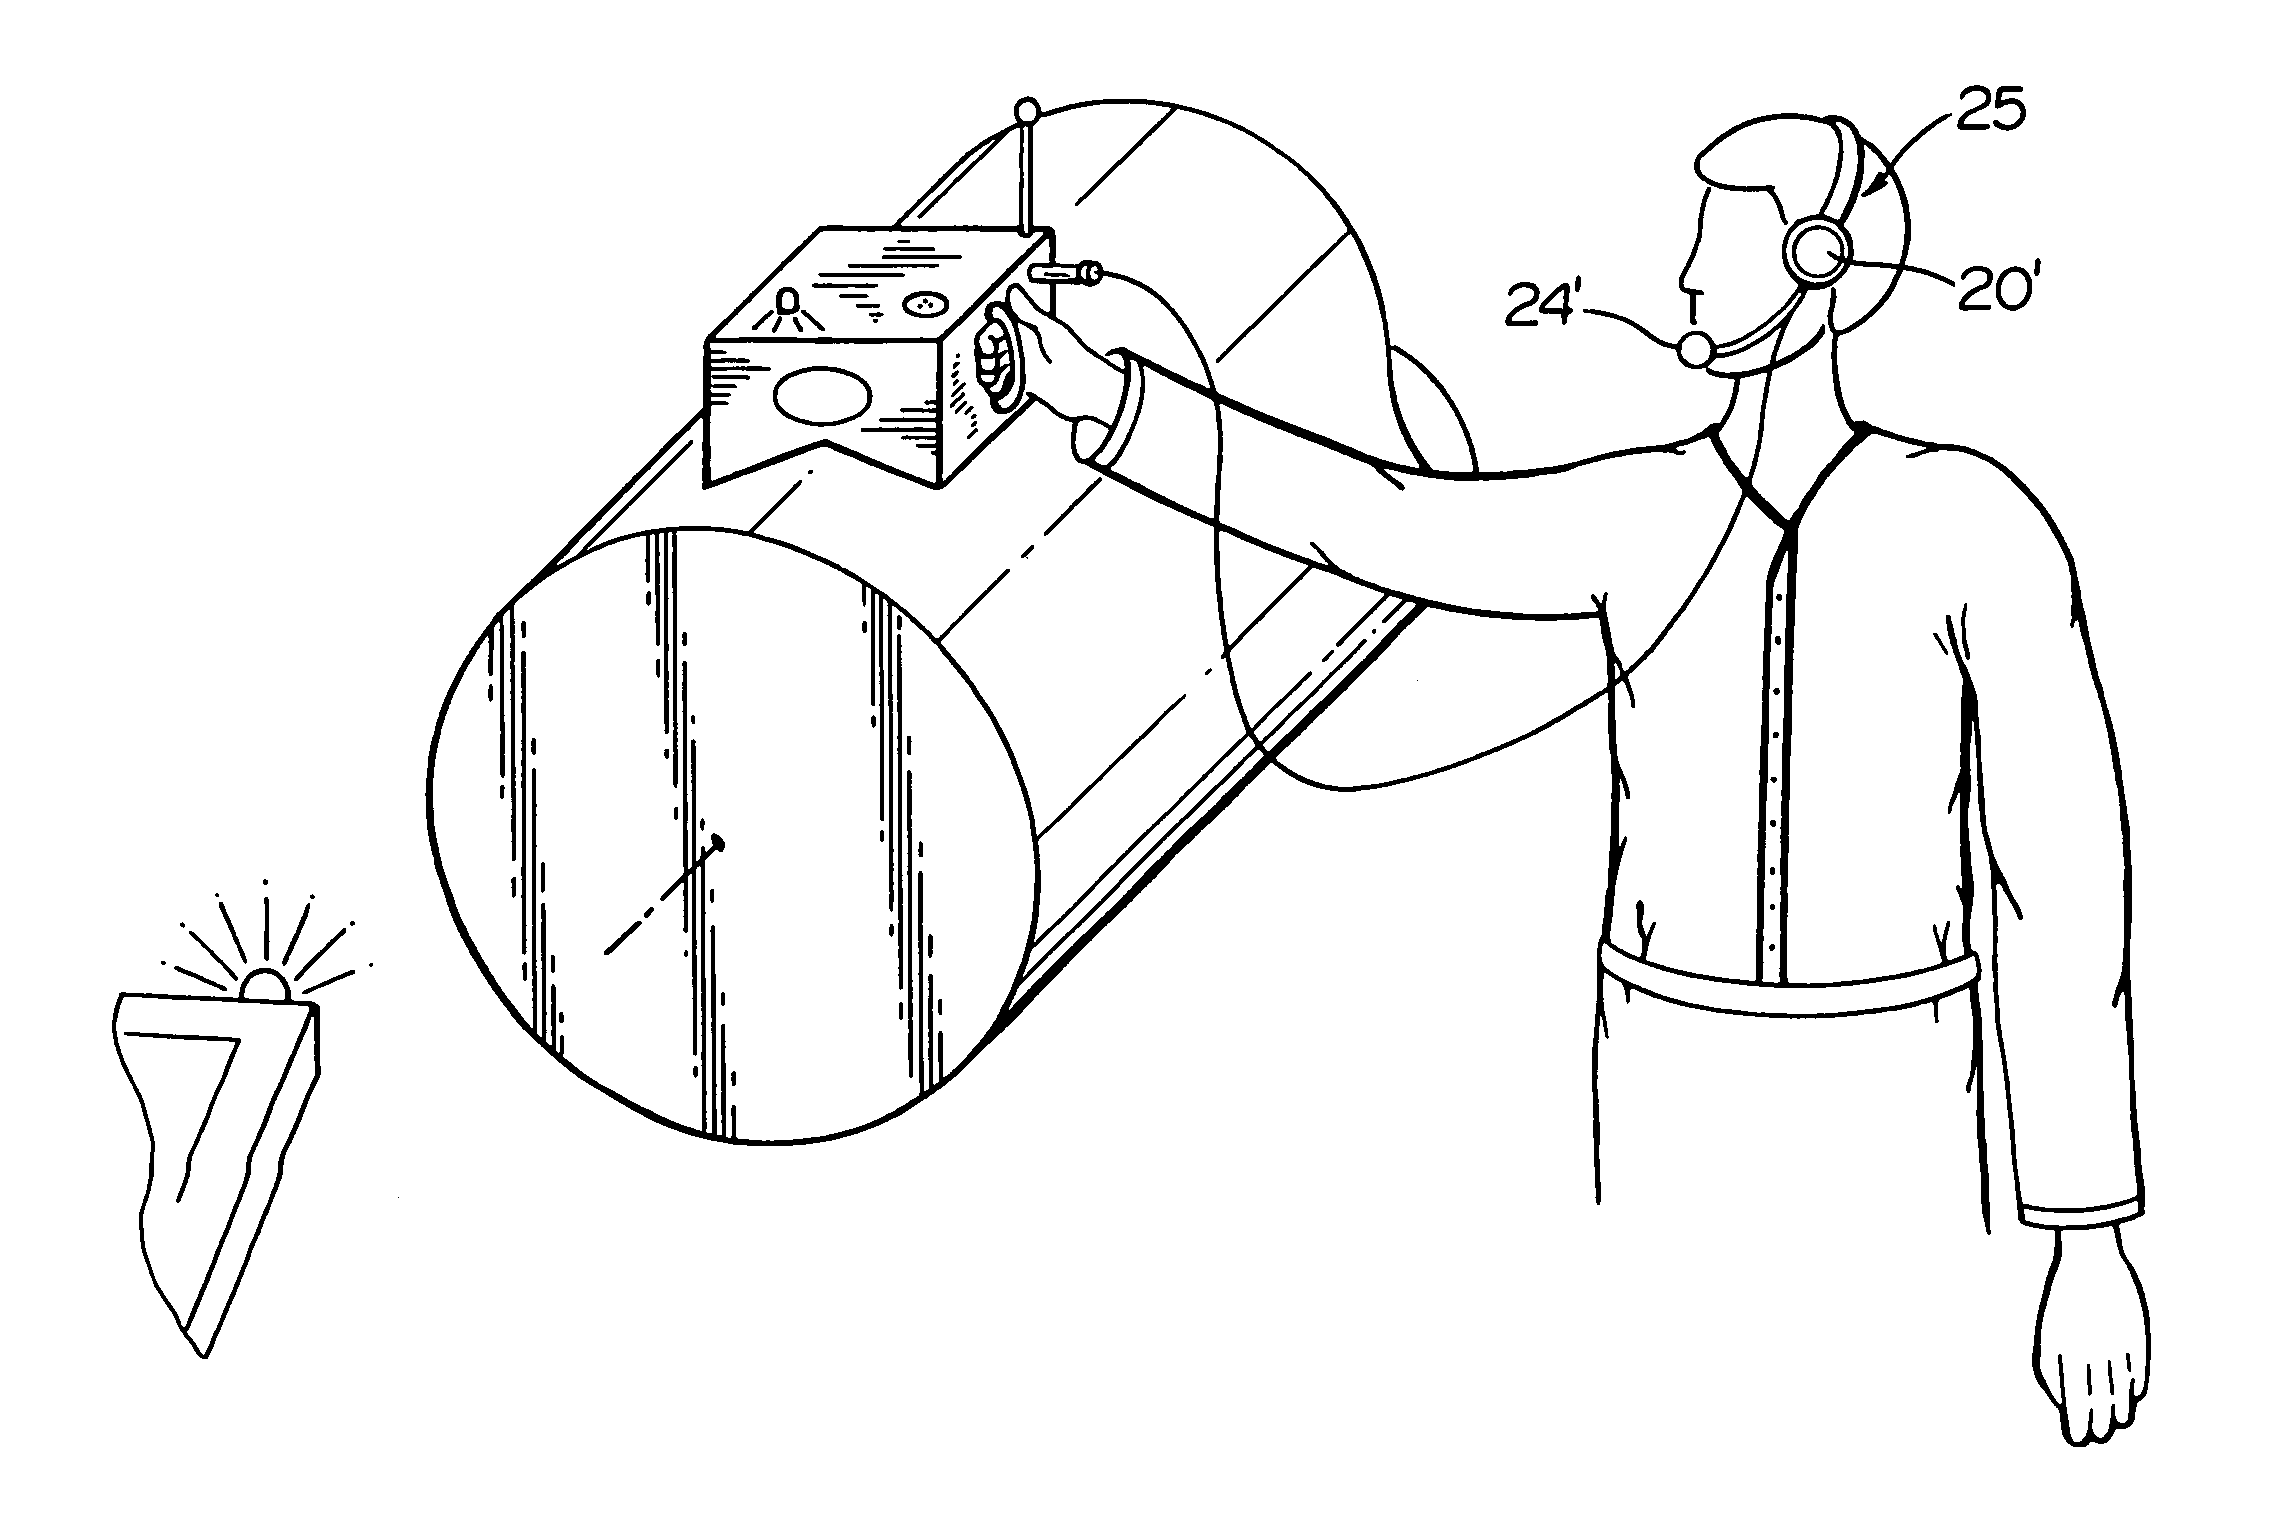 Ergonomic, interference signal-reducing position measurement probe for mutual alignment of bodies